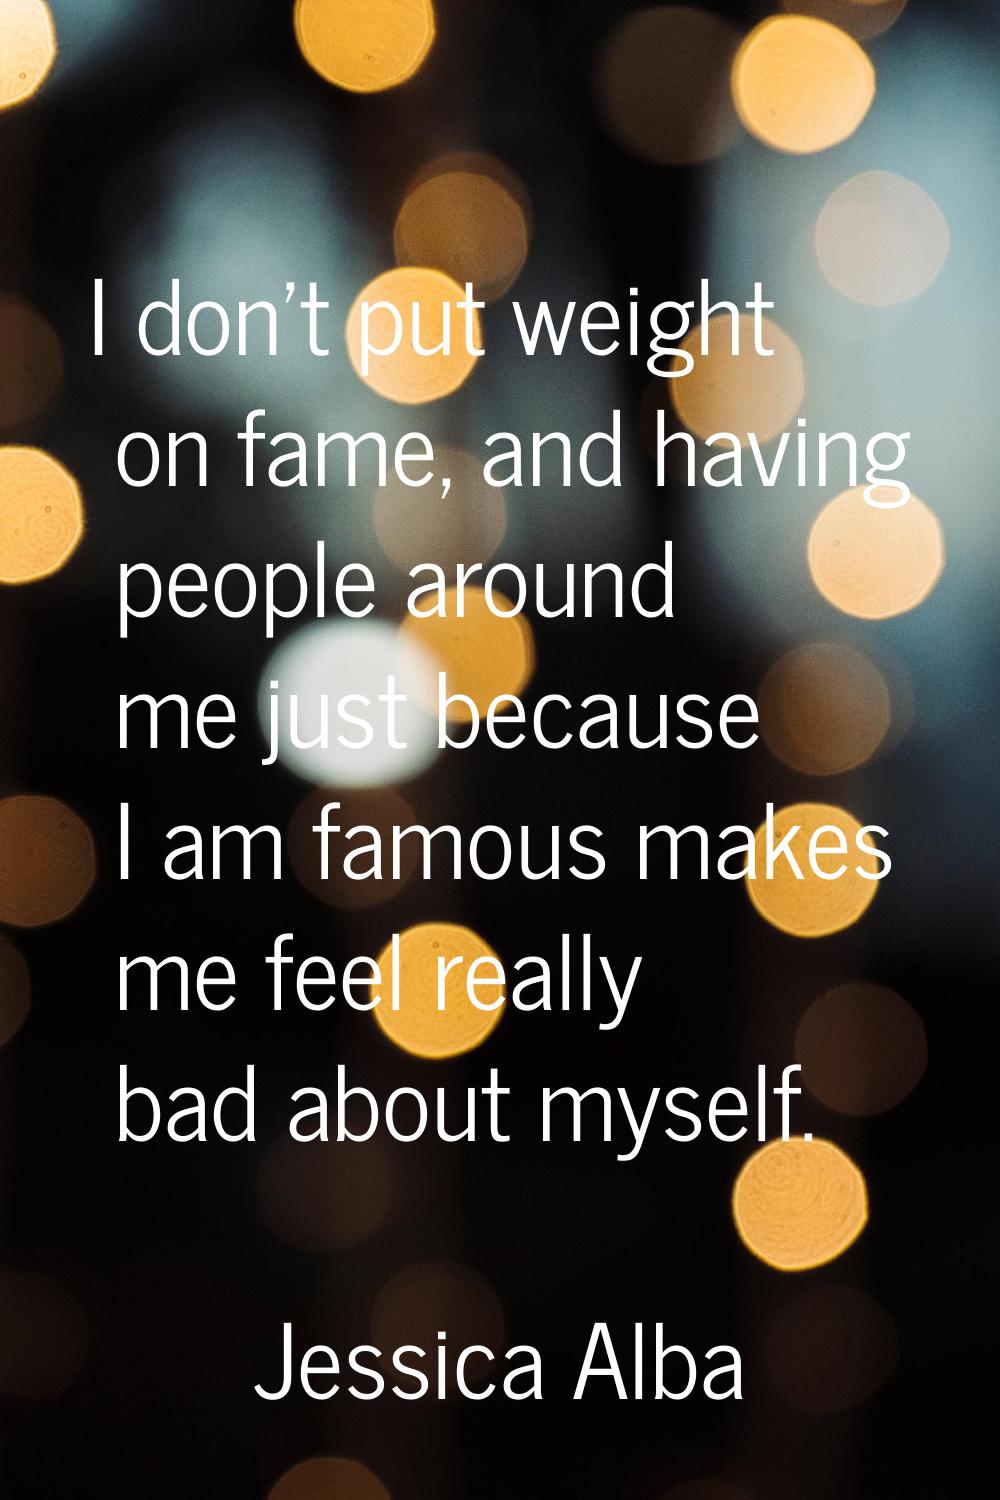 I don't put weight on fame, and having people around me just because I am famous makes me feel real